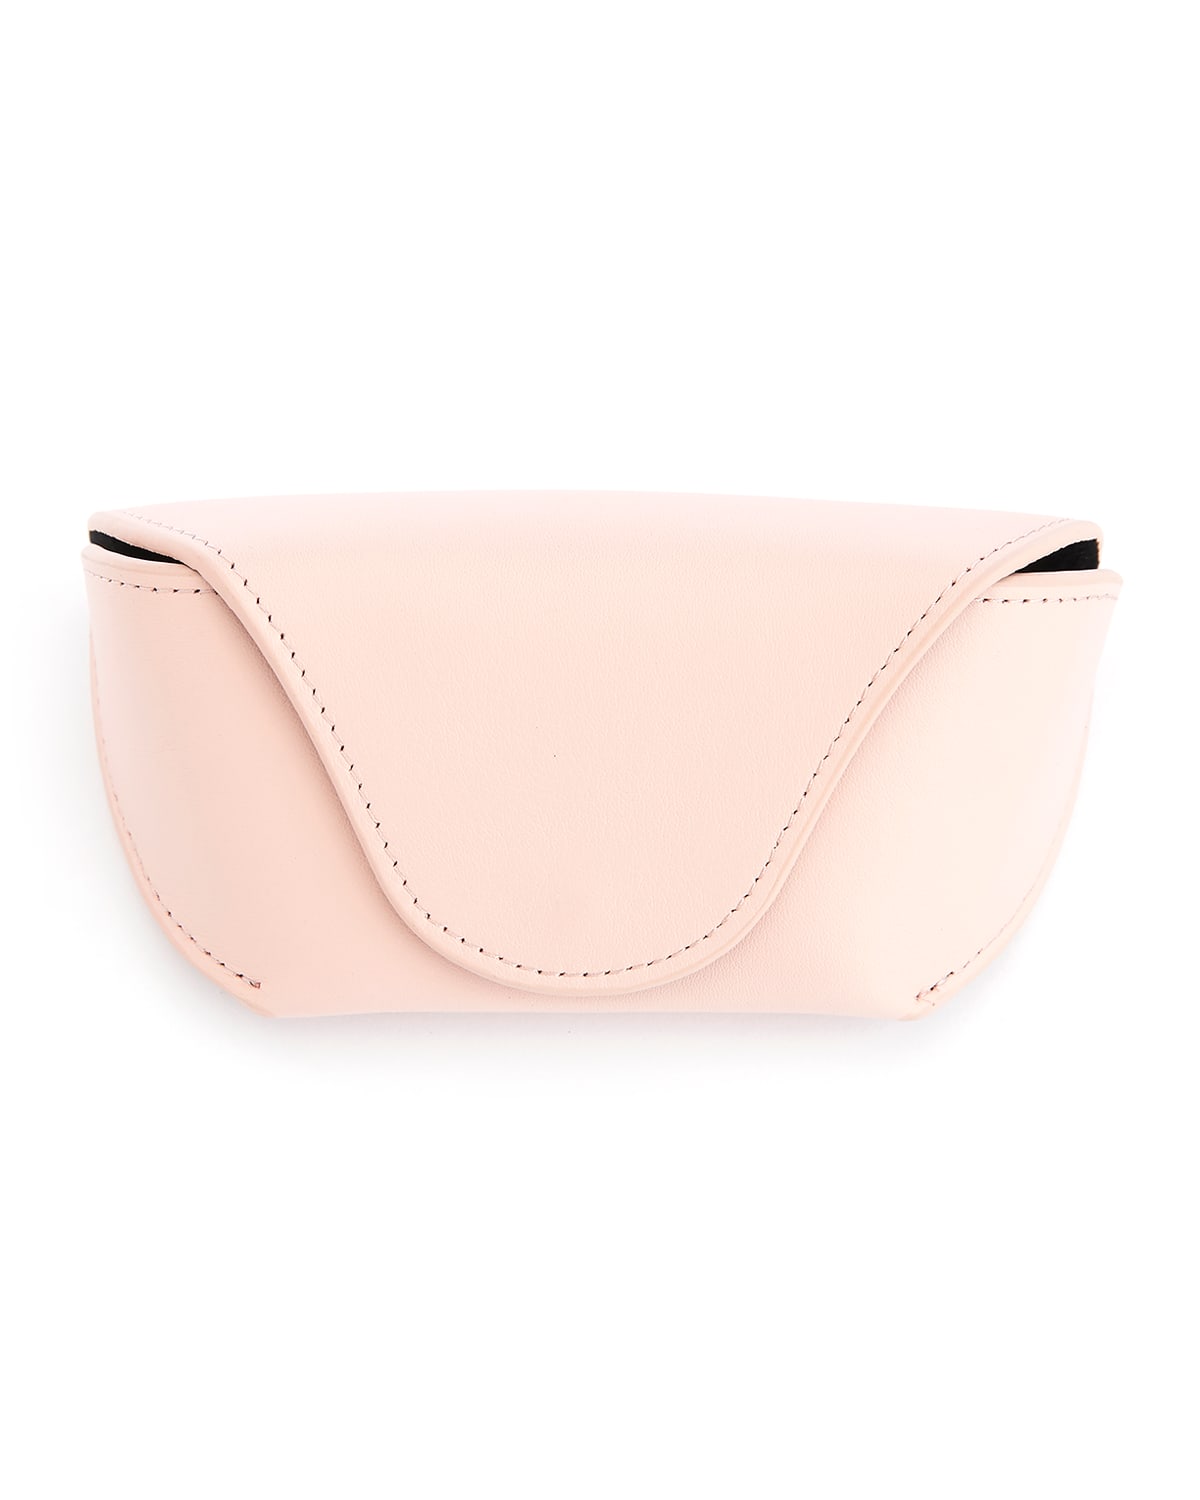 Royce New York Suede Lined Sunglasses Carrying Case In Blush Pink